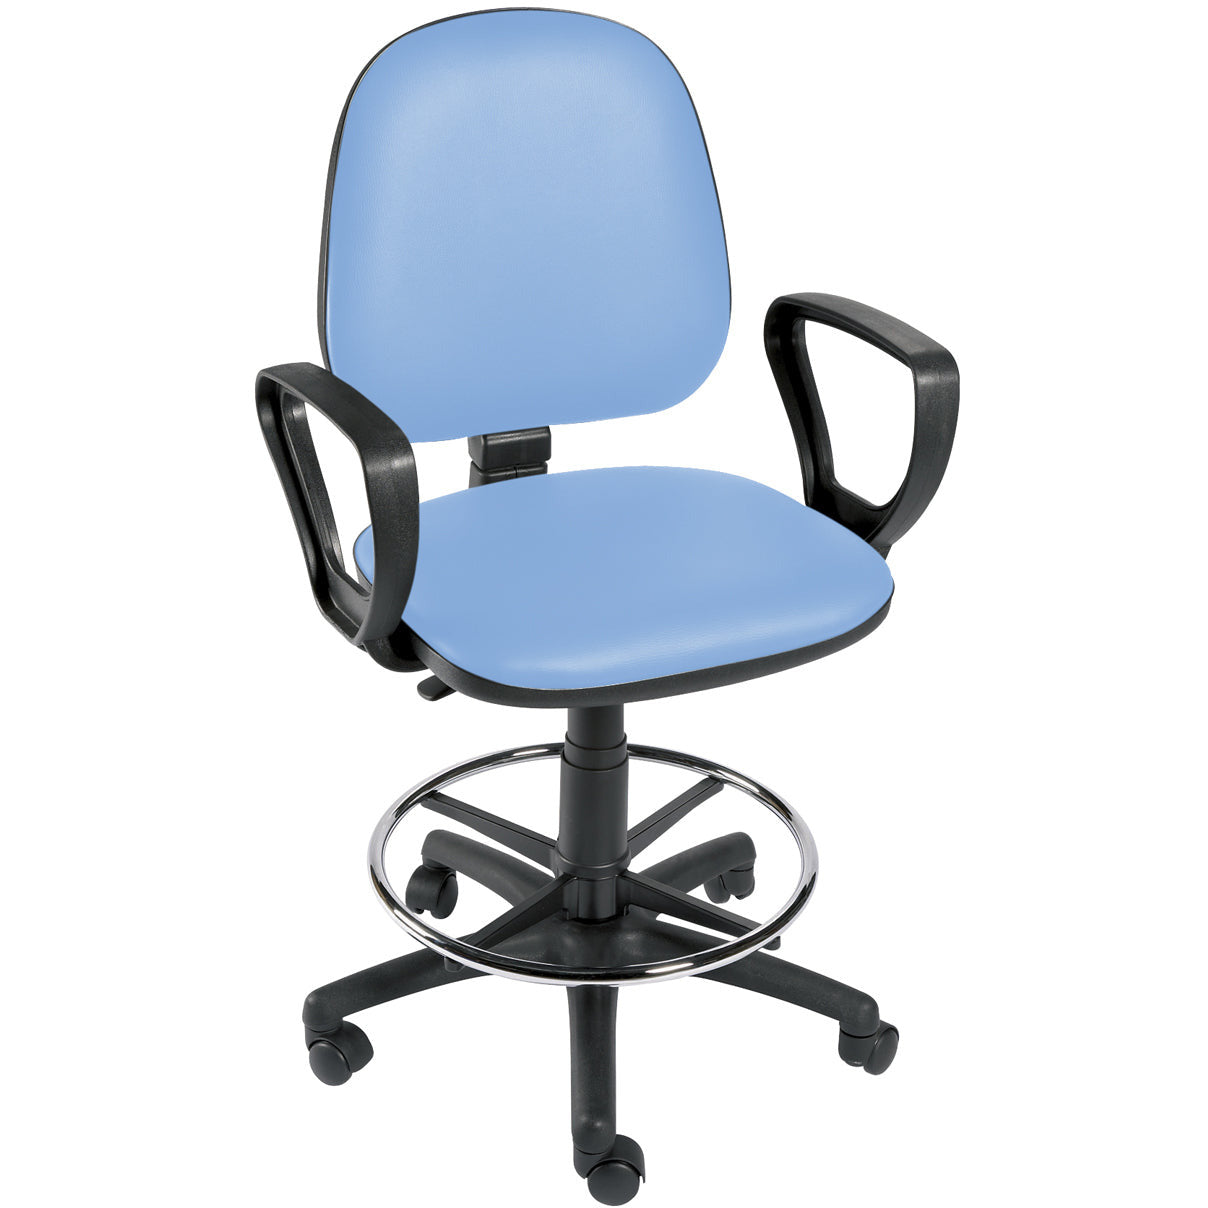 Sunflower Gas-Lift Chair with Arms and Foot Ring